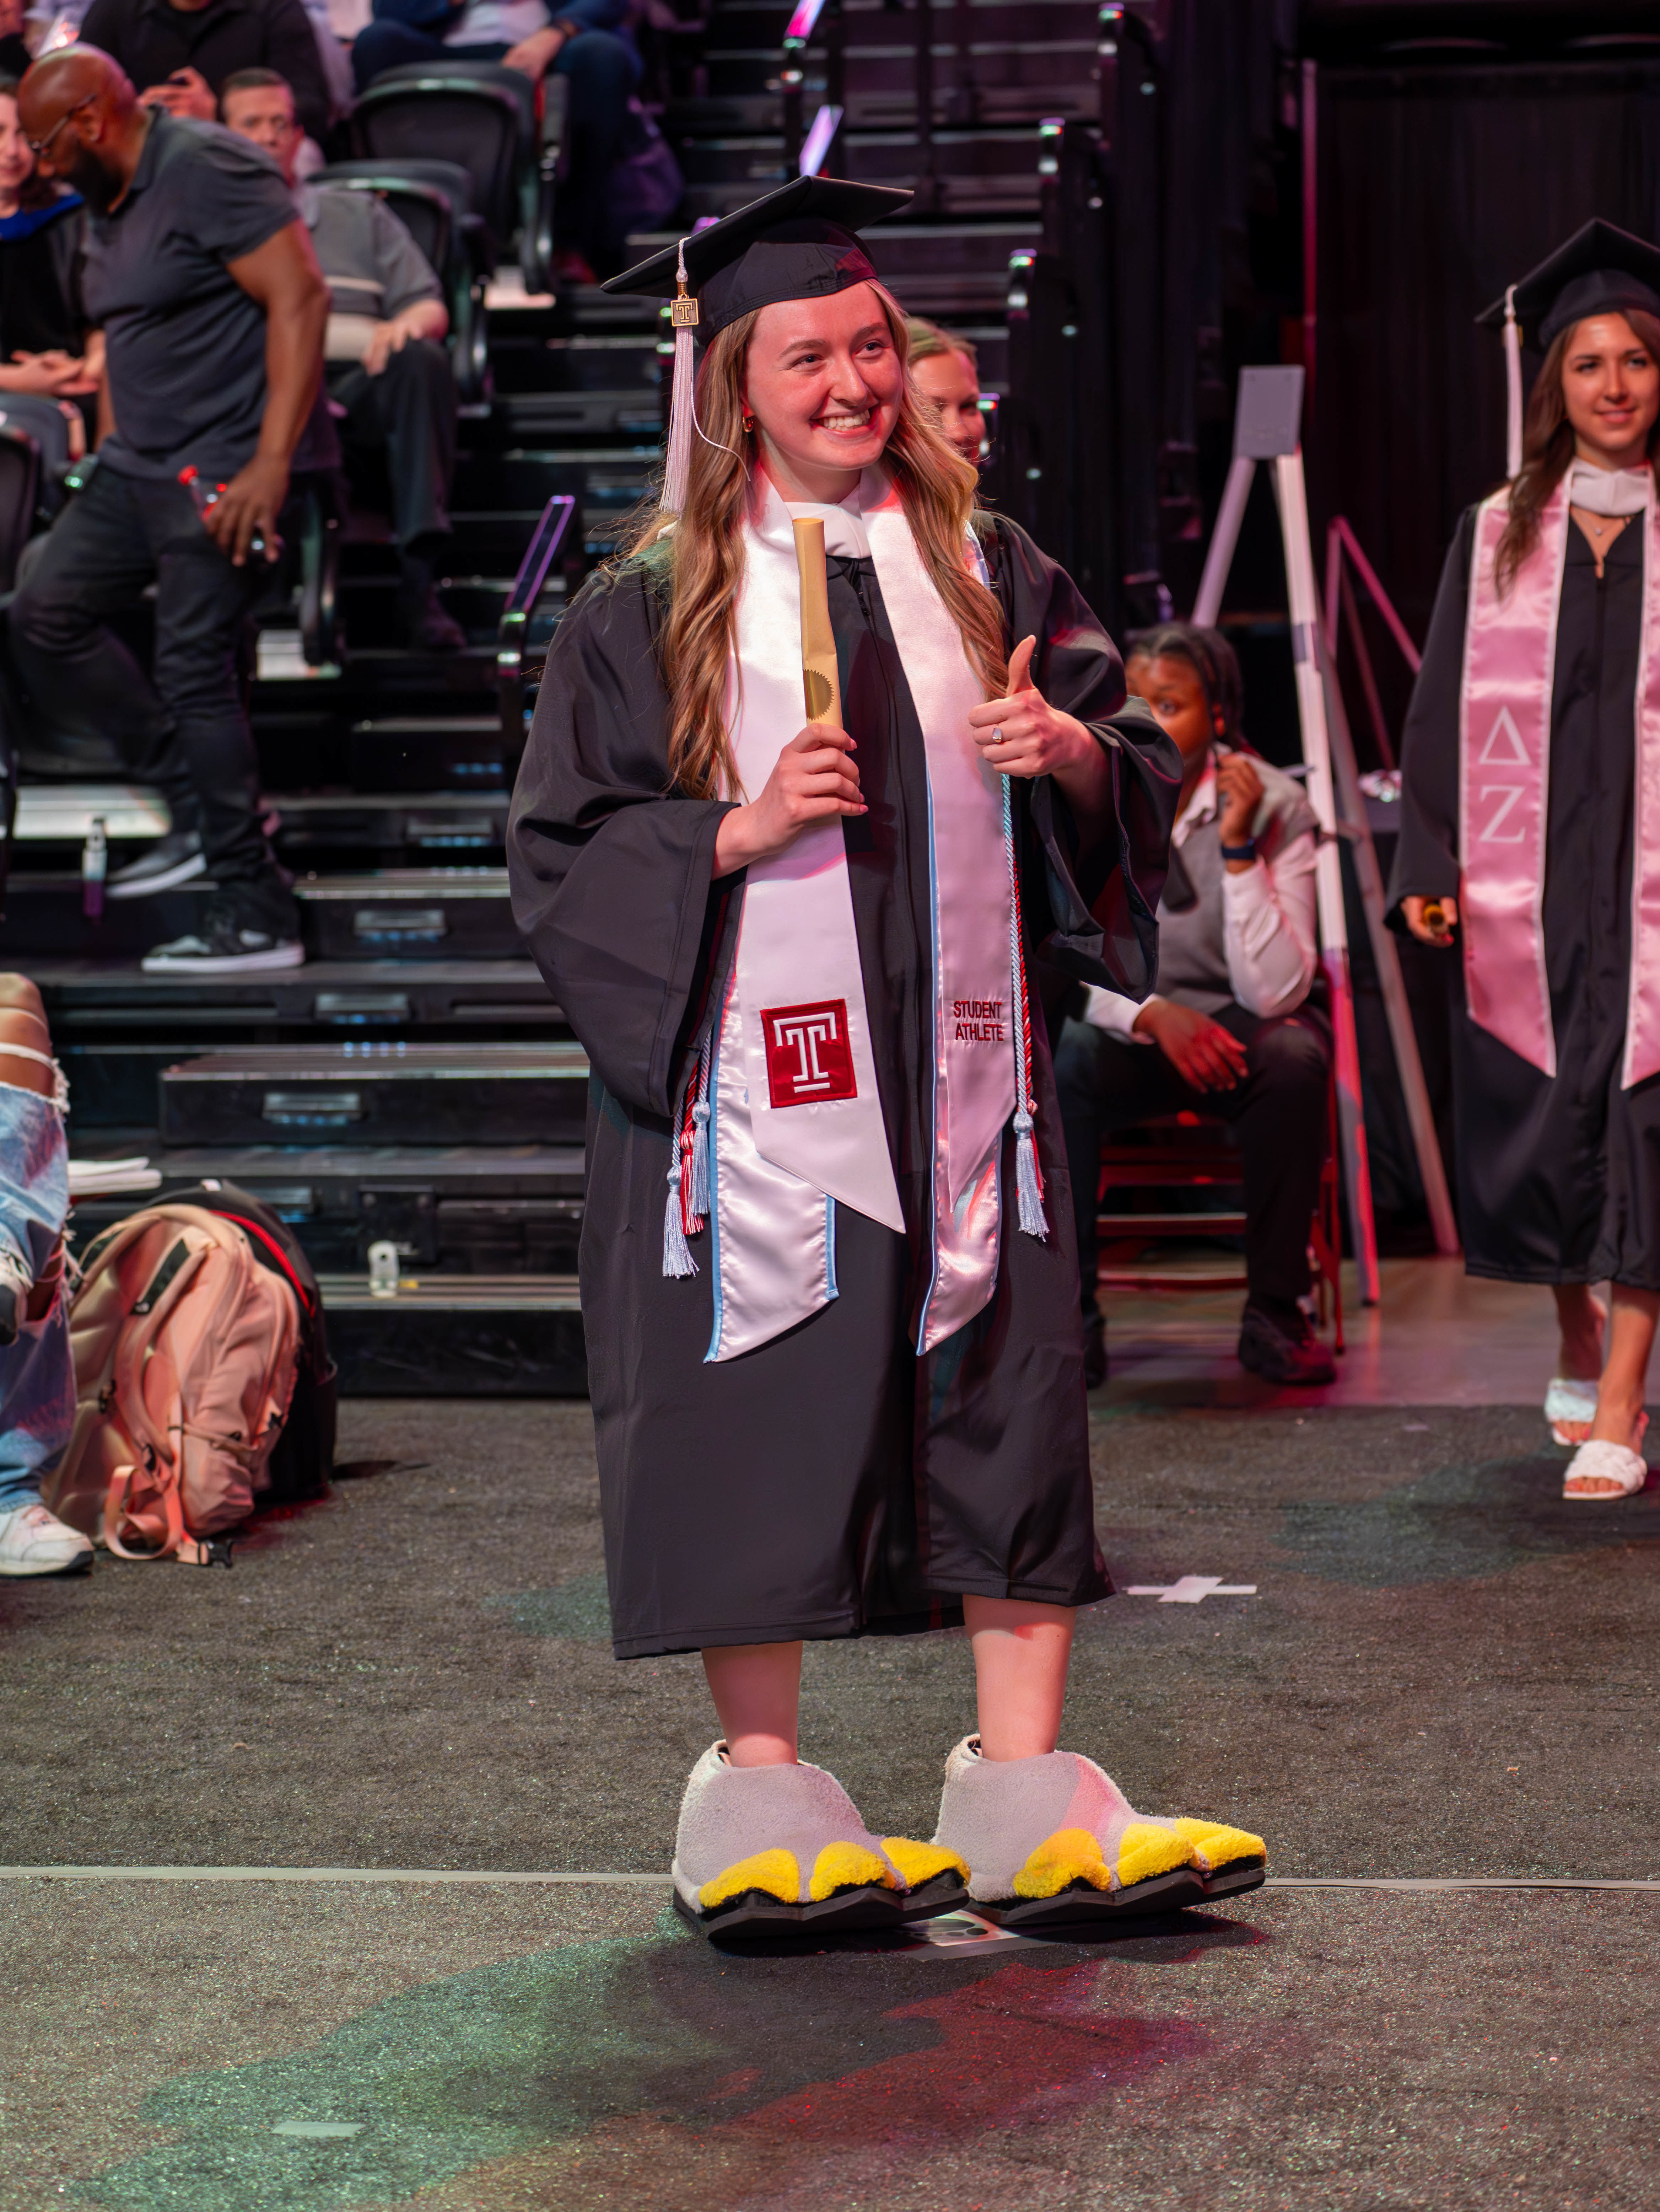 Graduate wearing "Hooter Feet" giving thumbs up after crossing the stage